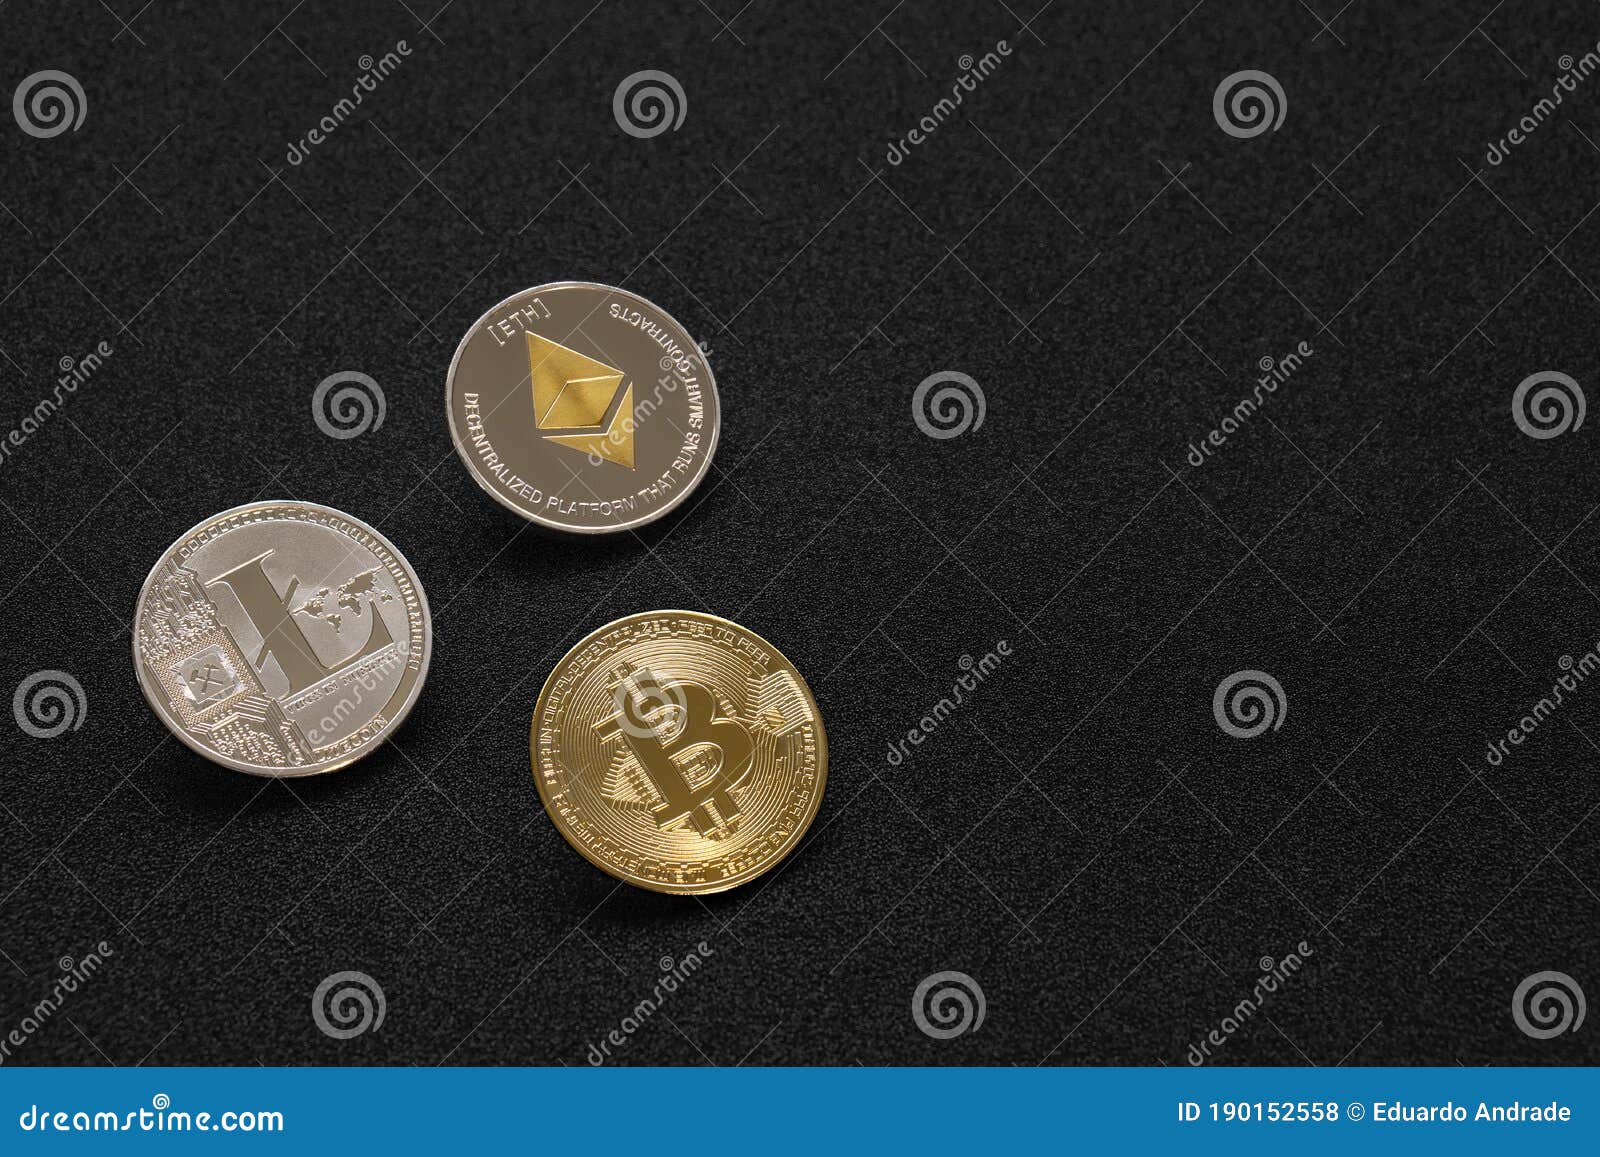 Colored coins ethereum https www worldcoinindex com coin bitcoin